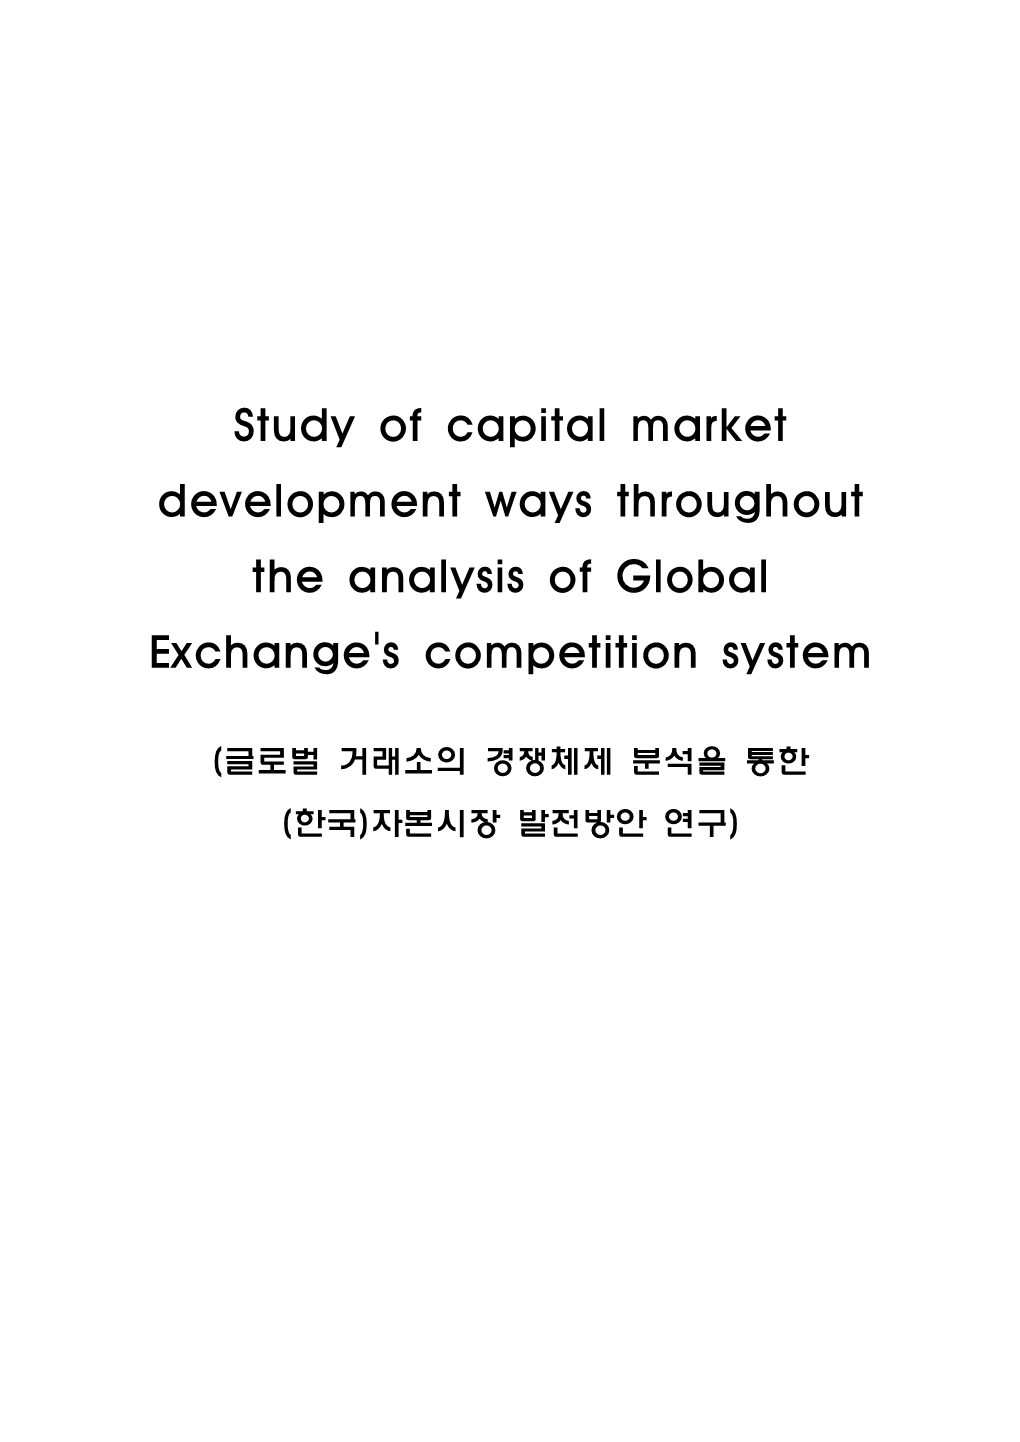 Study of Capital Market Development Ways Throughout the Analysis of Global Exchange's Competition System